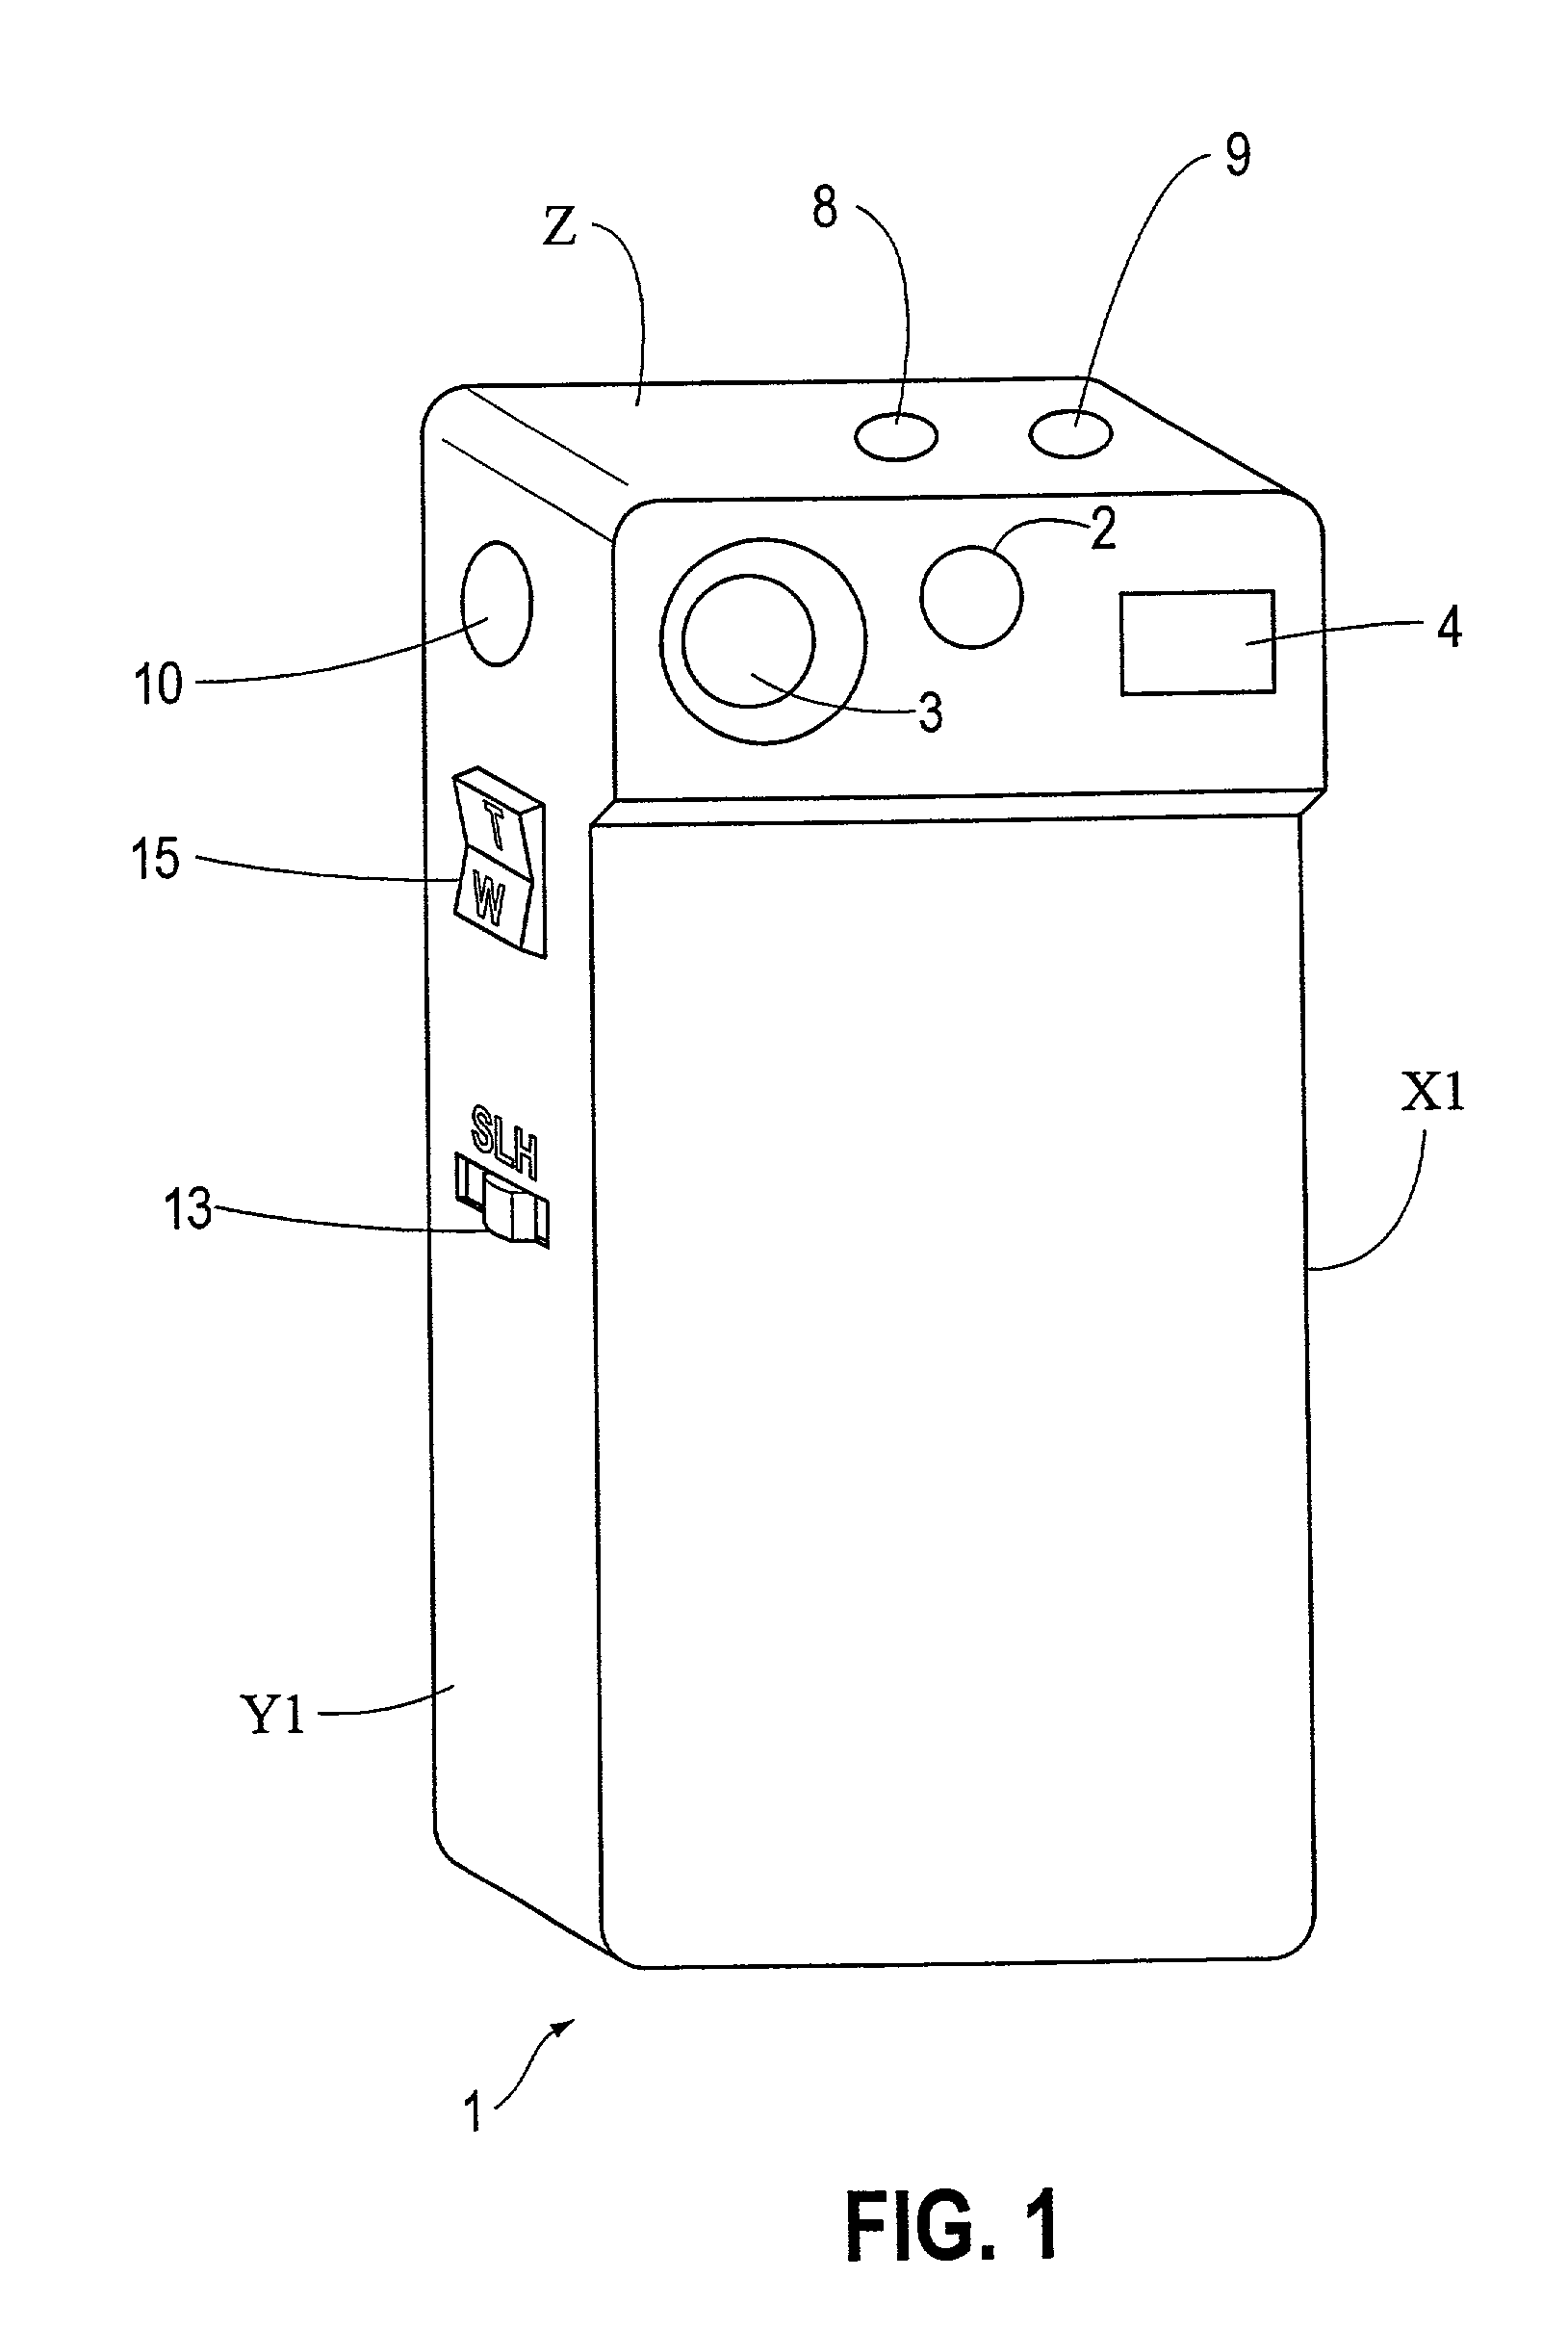 Digital camera including a zoom button and/or a touch tablet useable for performing a zoom operation